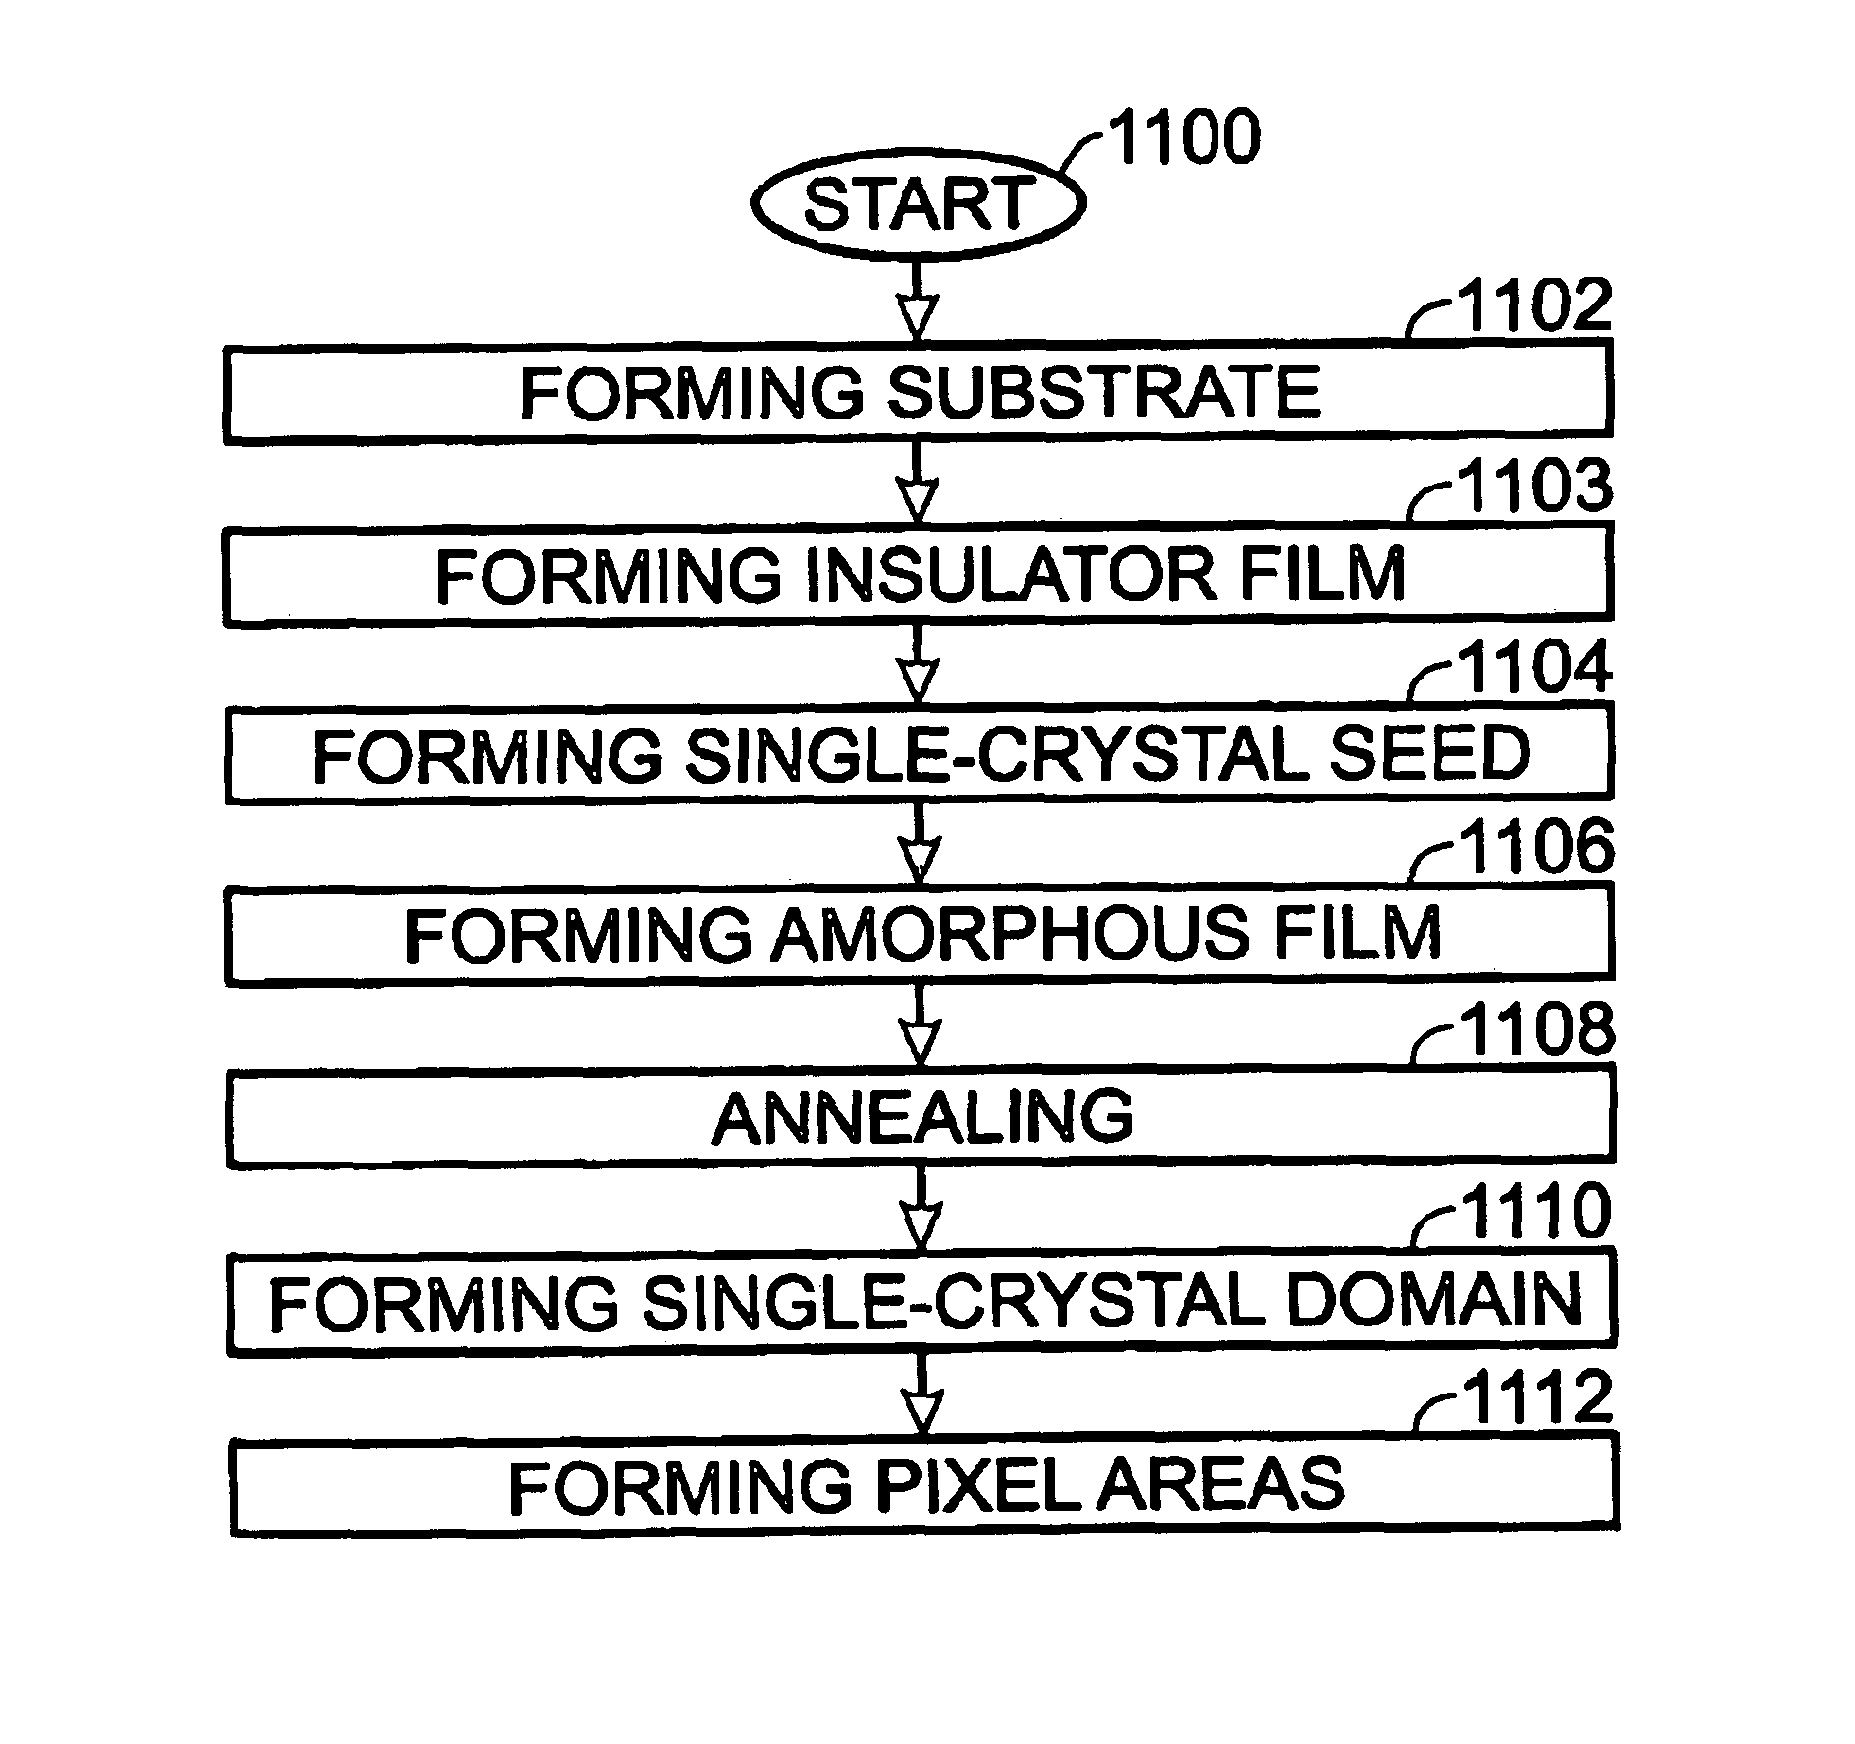 System and method for forming single-crystal domains using crystal seeds